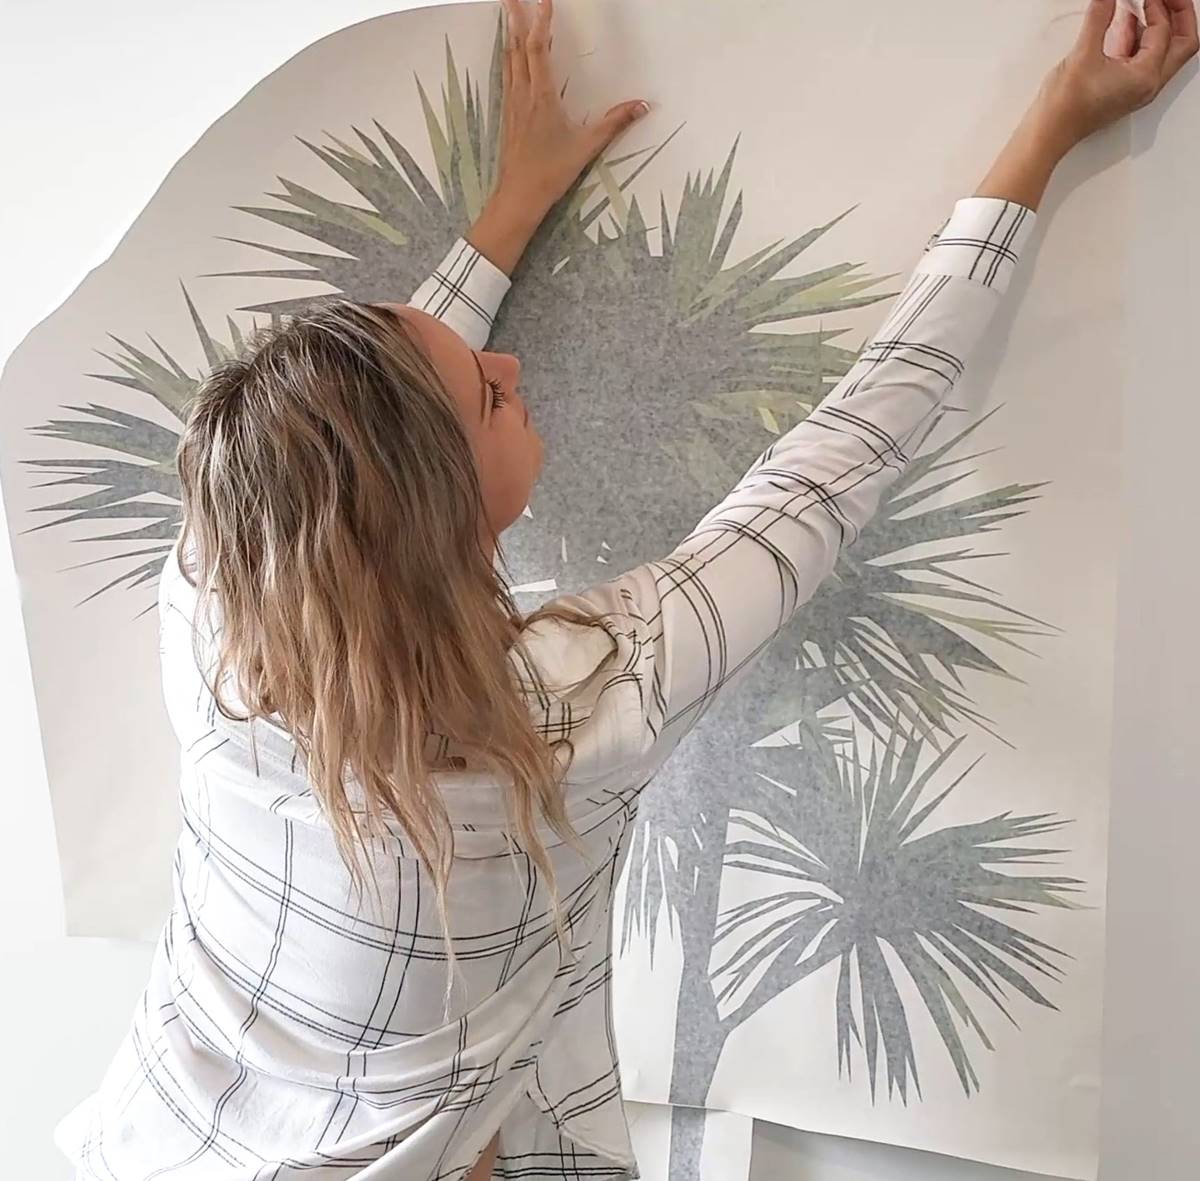 How To Put Up Wall Decals